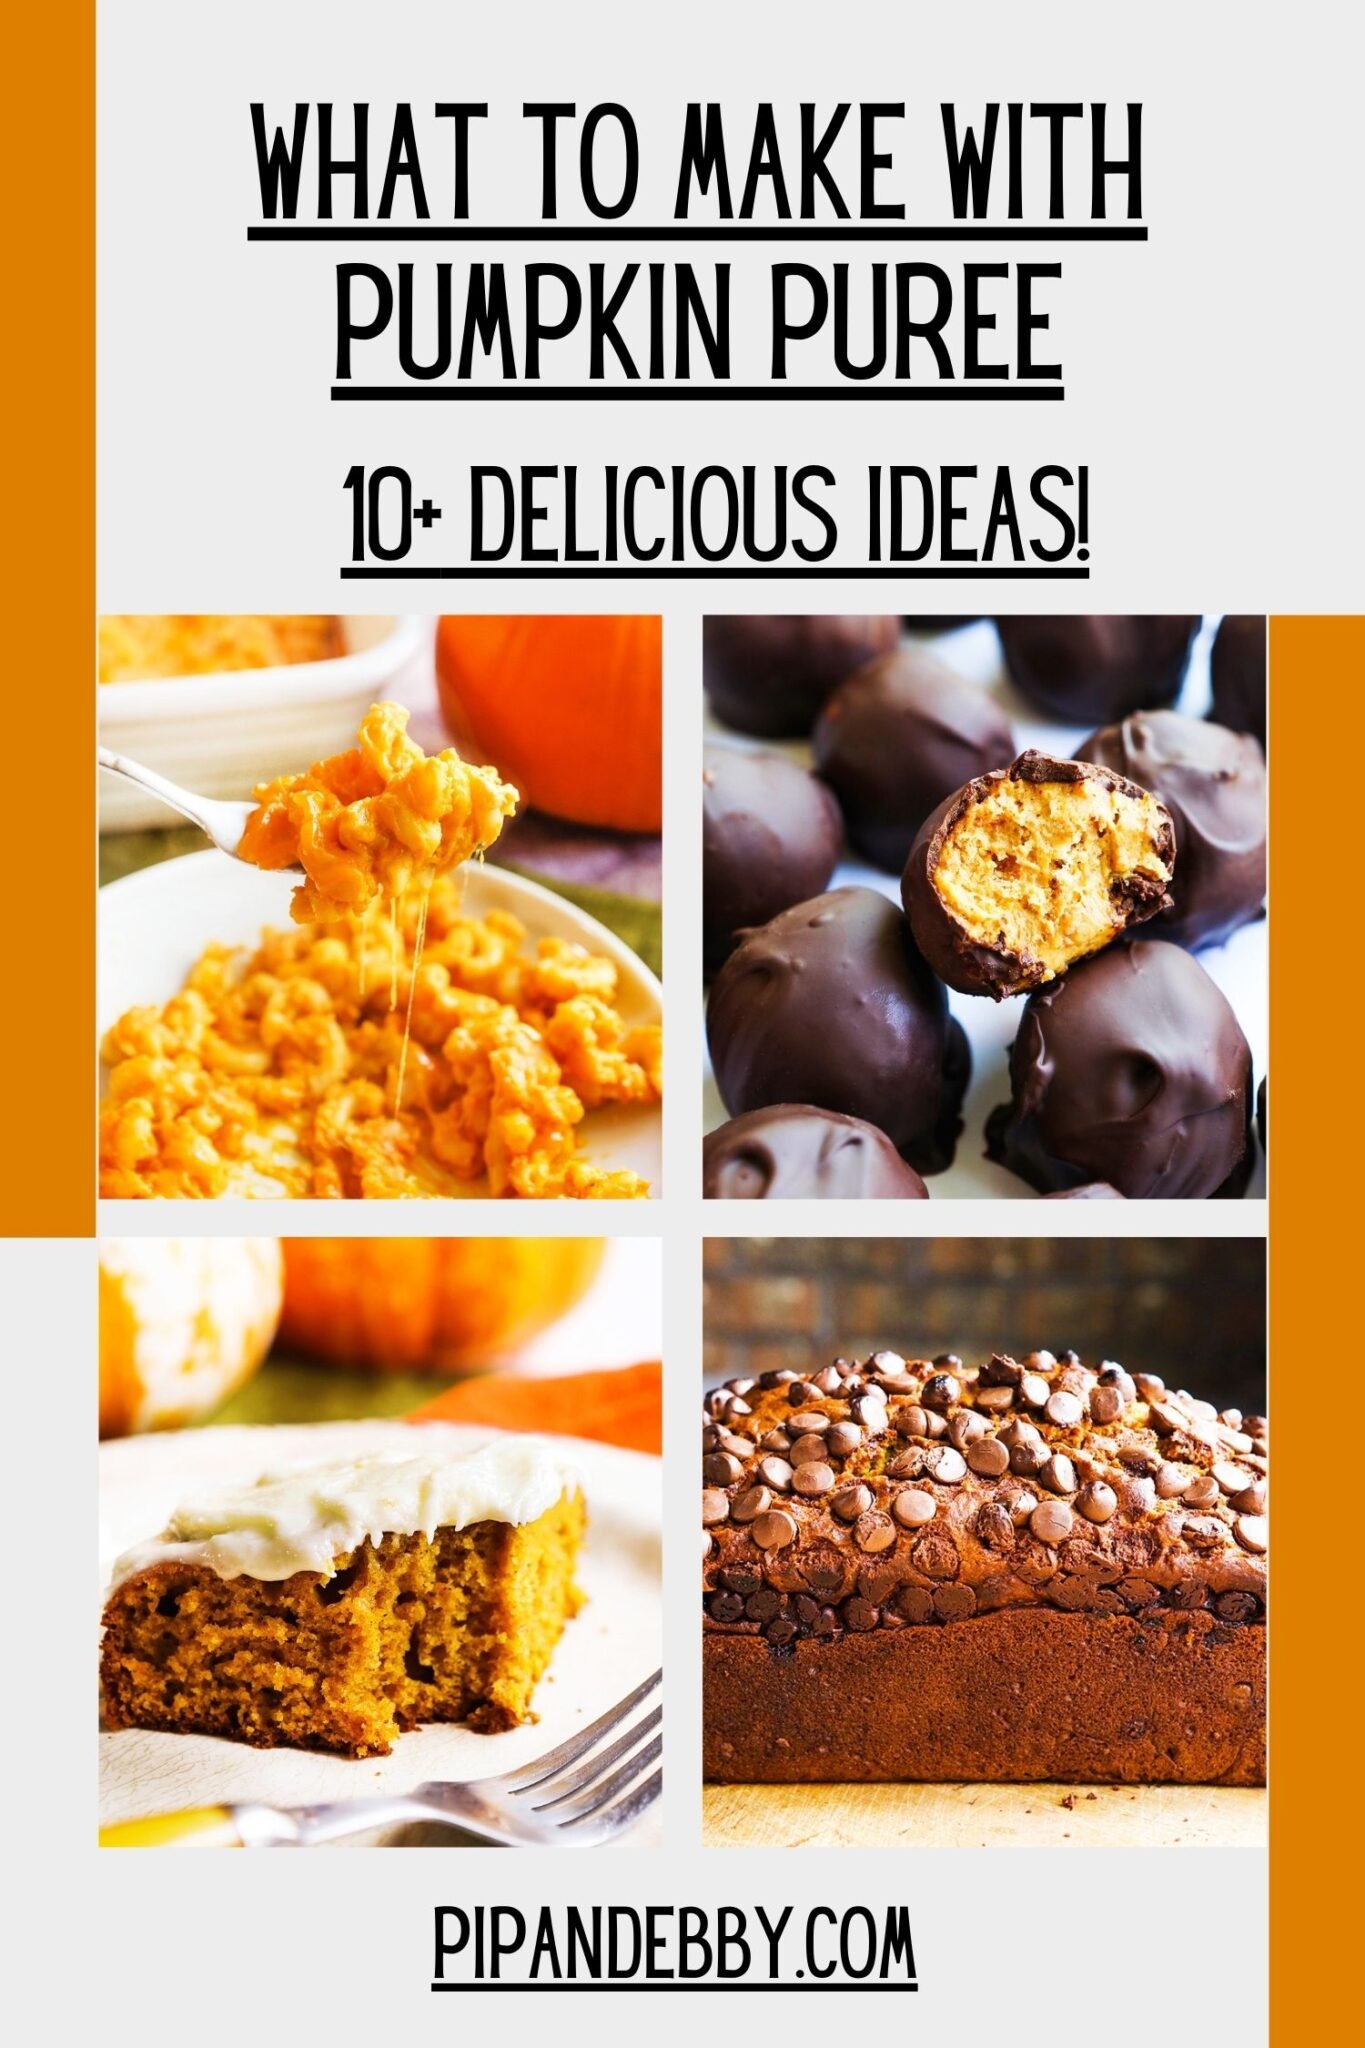 What to Make With Pumpkin Puree - 10 ideas! - Pip and Ebby